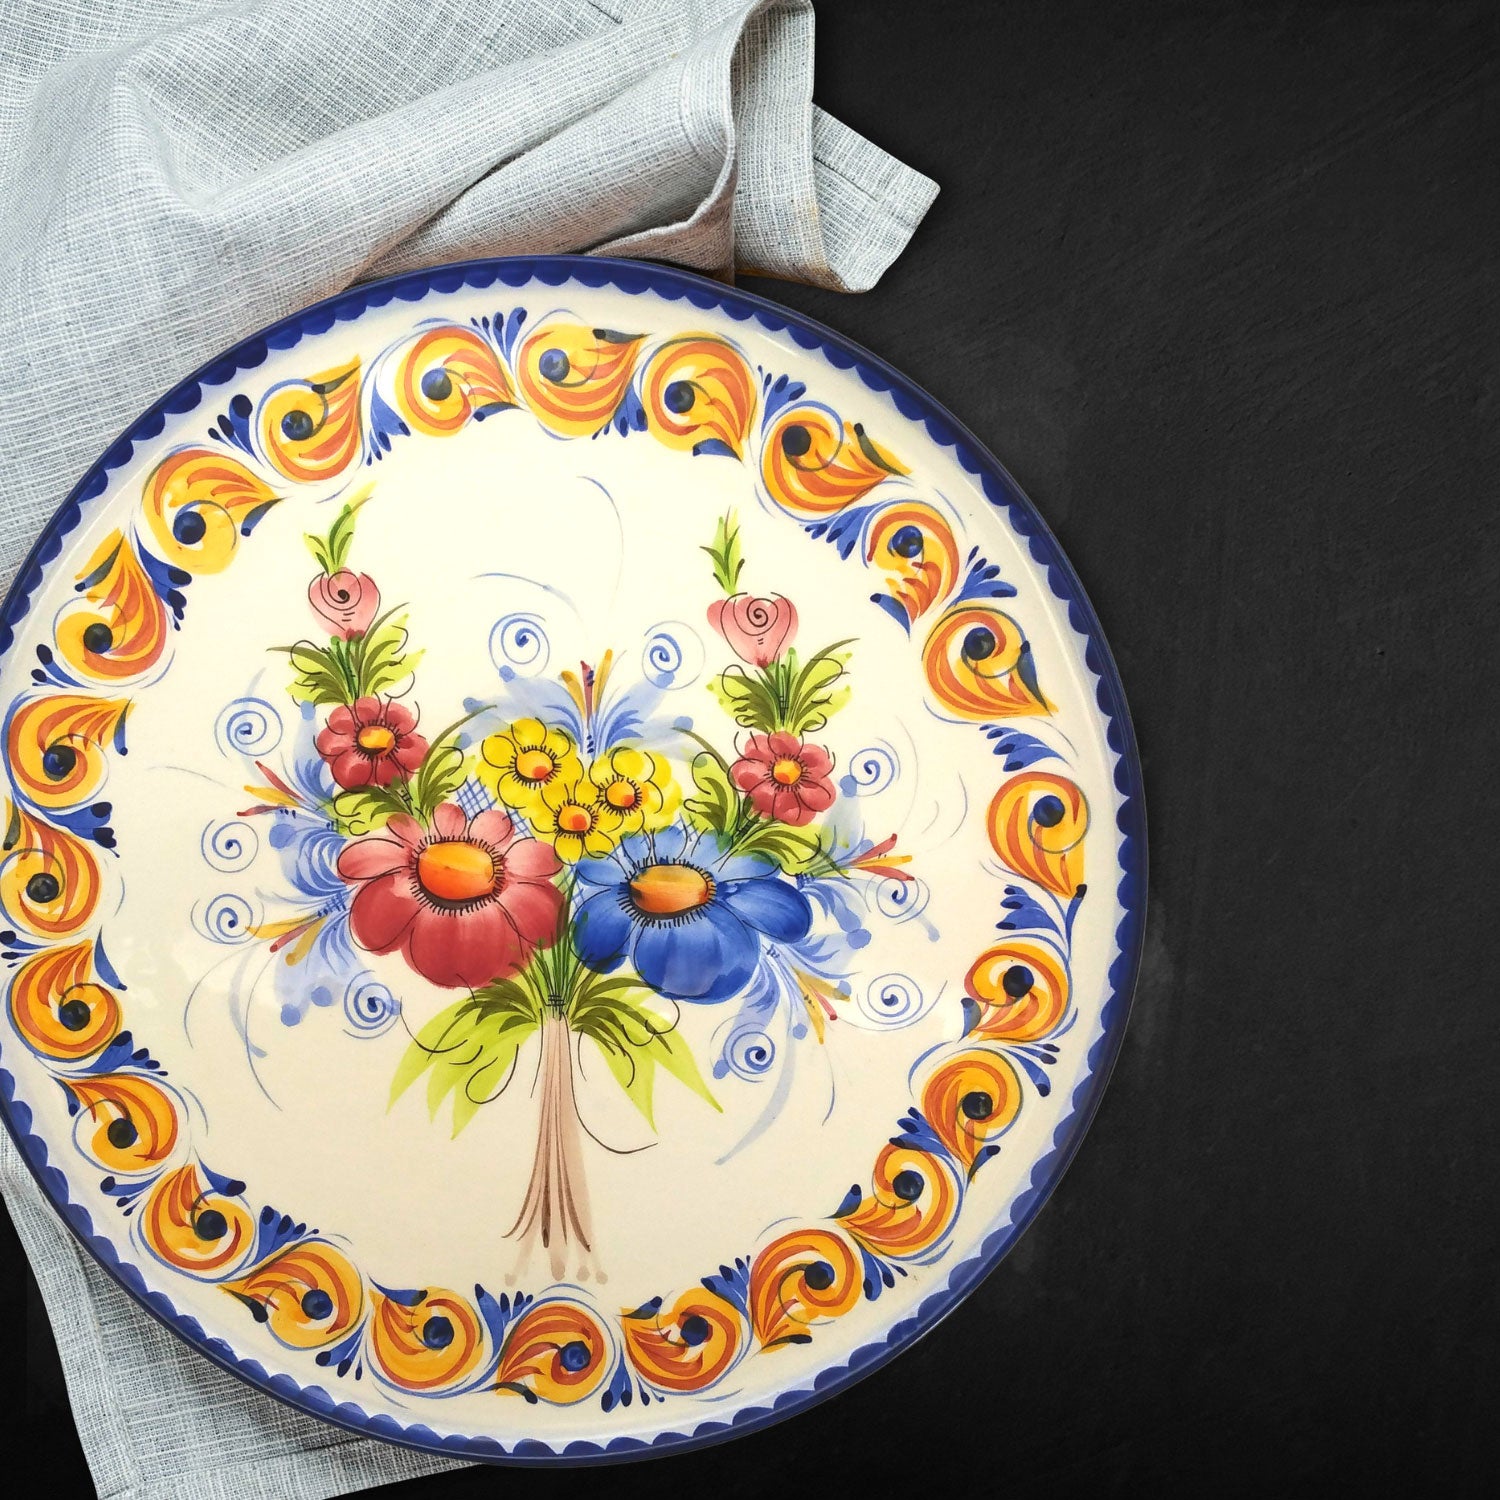 13 Inch Portuguese Pottery Hand Painted Floral Large Pizza Serving Plate